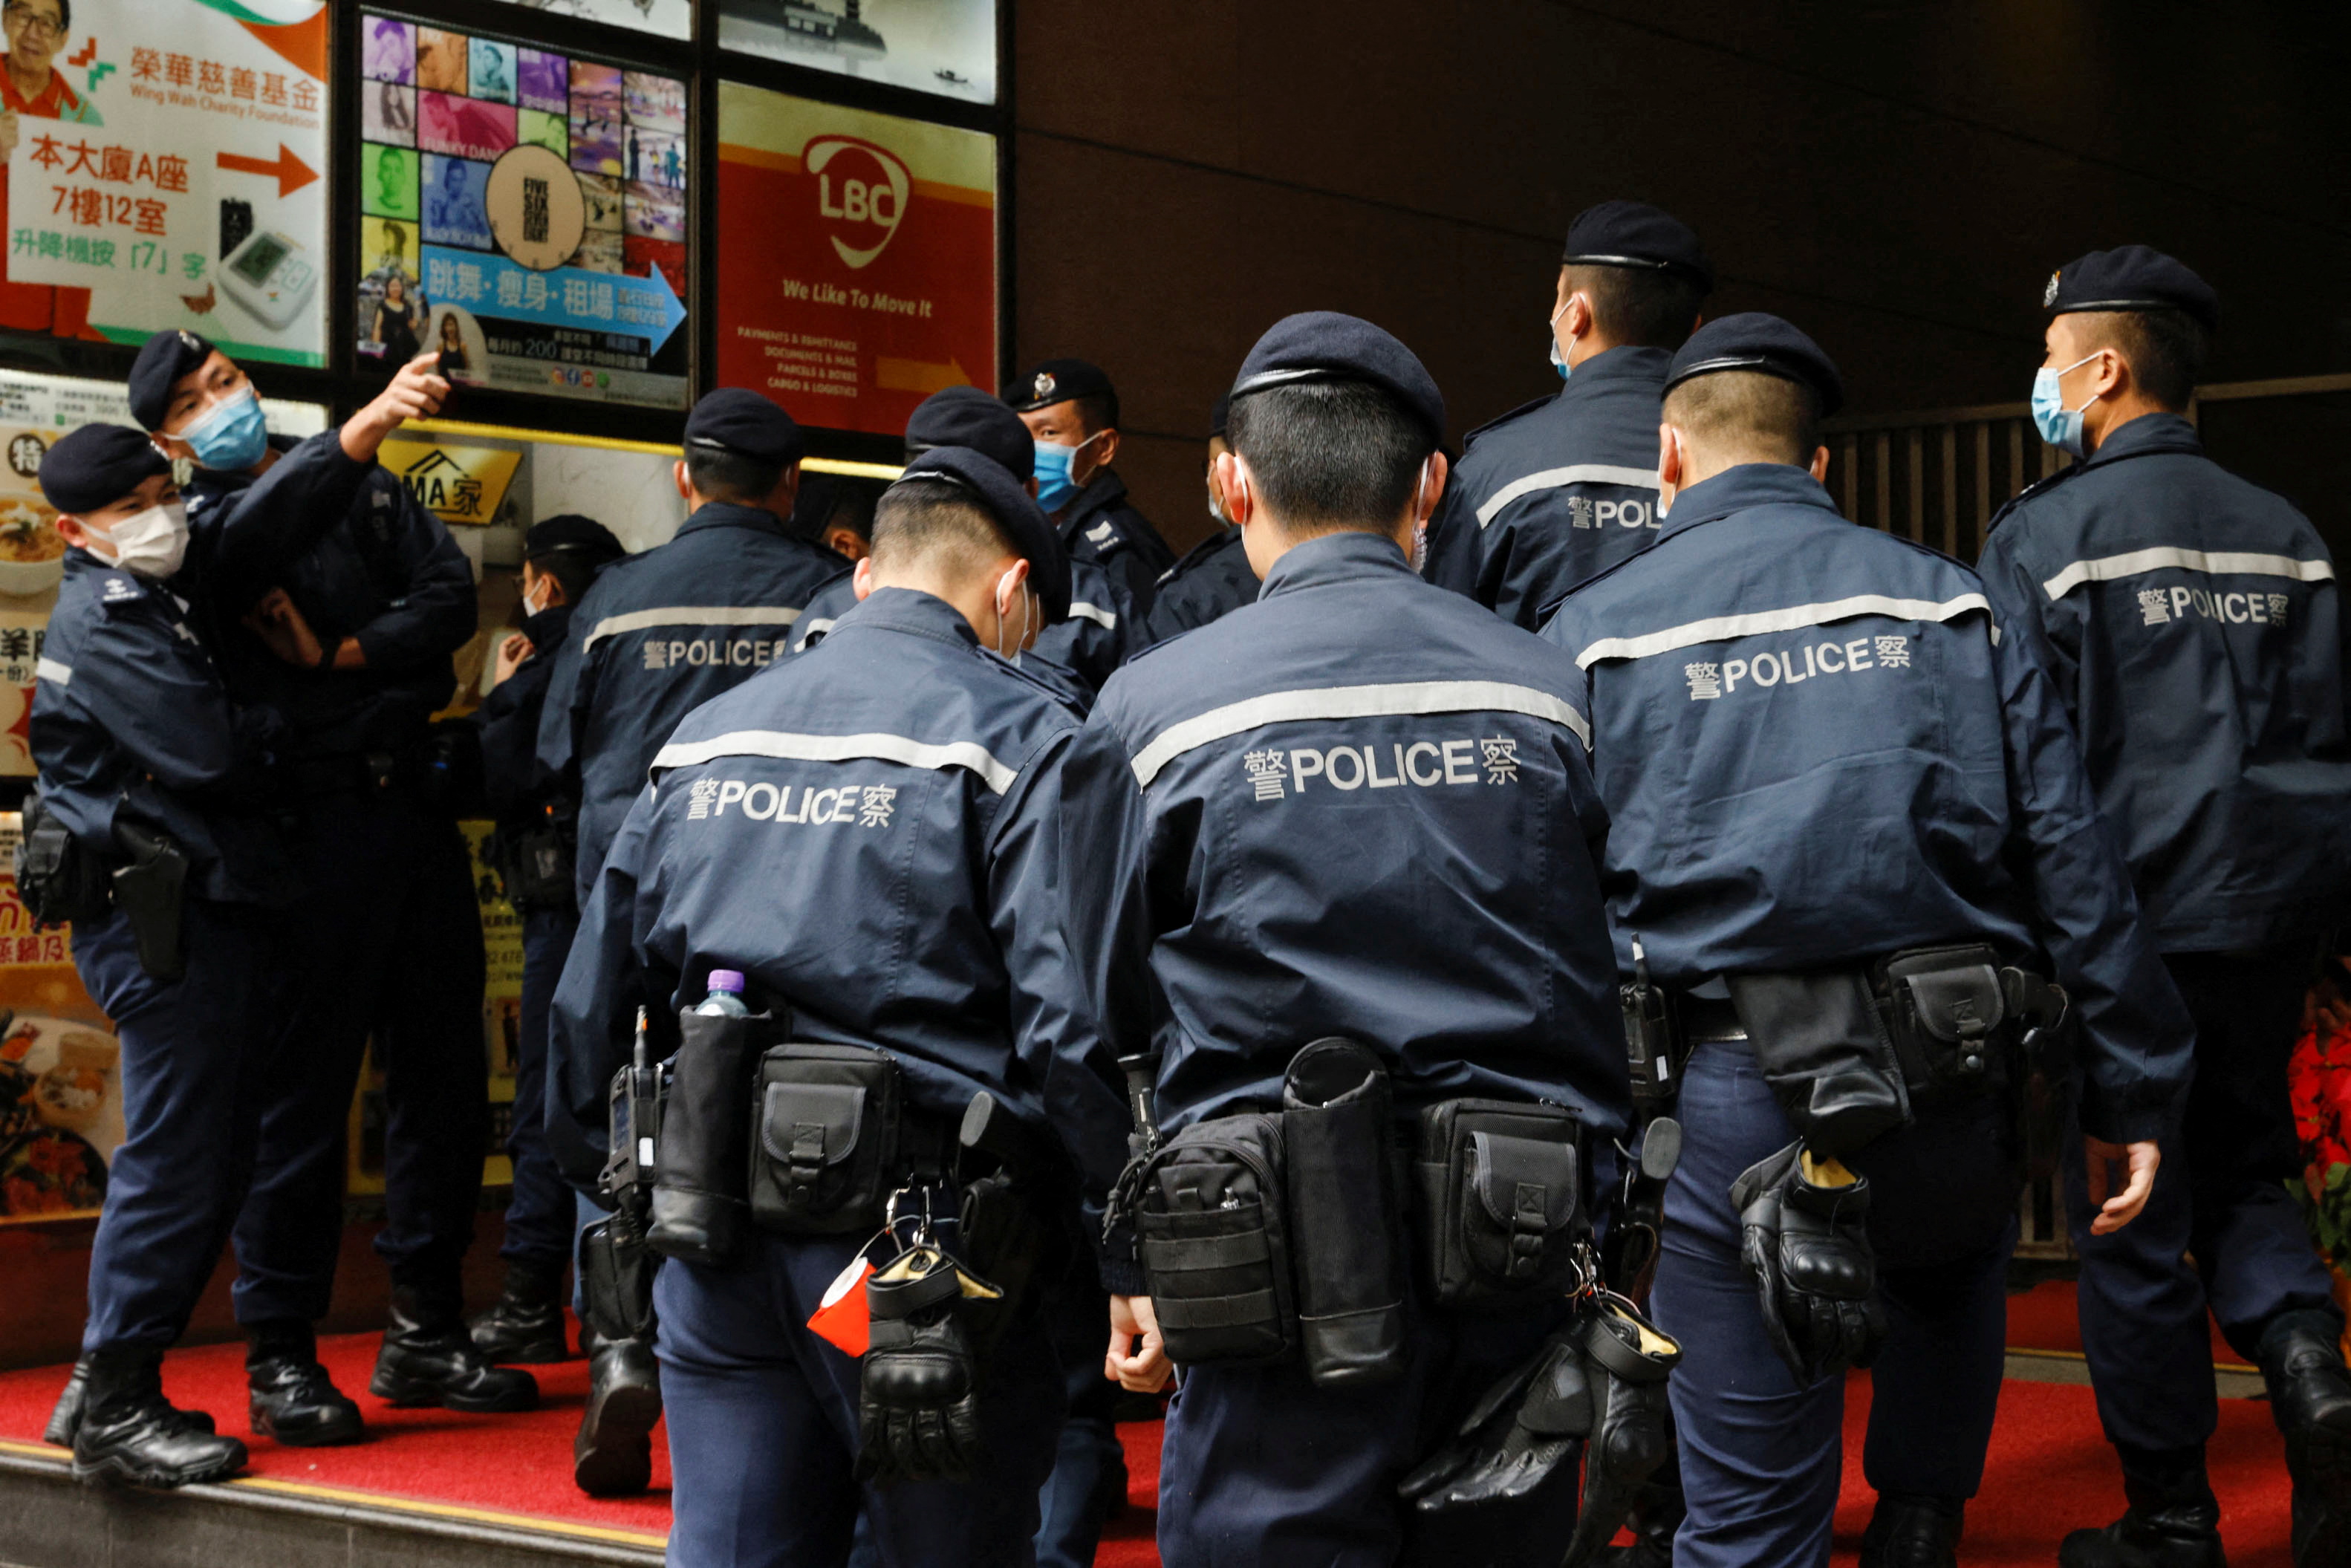 Police are seen outside the Stand News office building, after six people were arrested "for conspiracy to publish seditious publication" according to Hong Kong's Police National Security Department, in Hong Kong